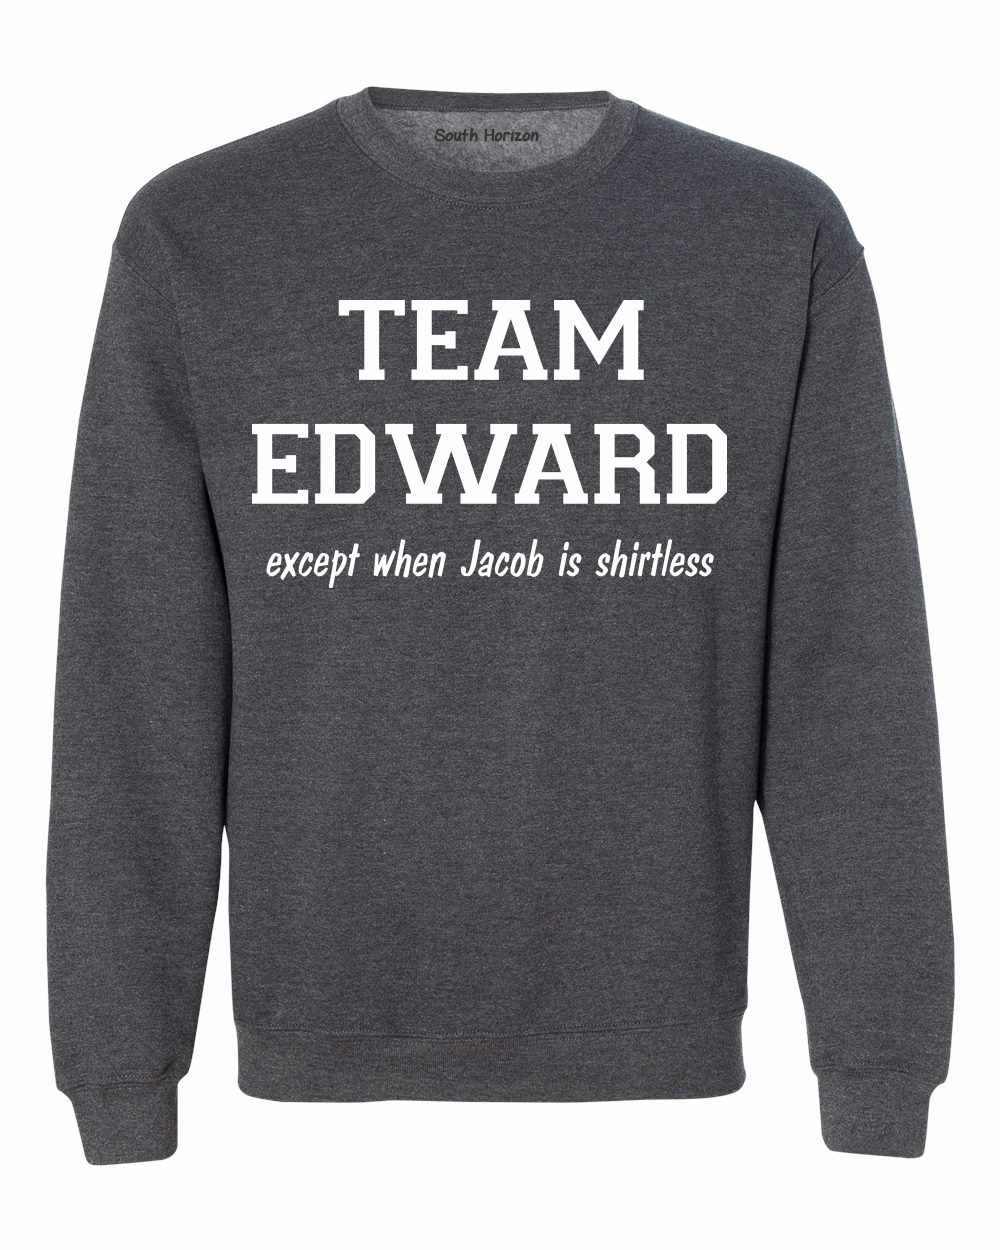 TEAM EDWARD Except when Jacob is Shirtless Sweat Shirt (#509-11)